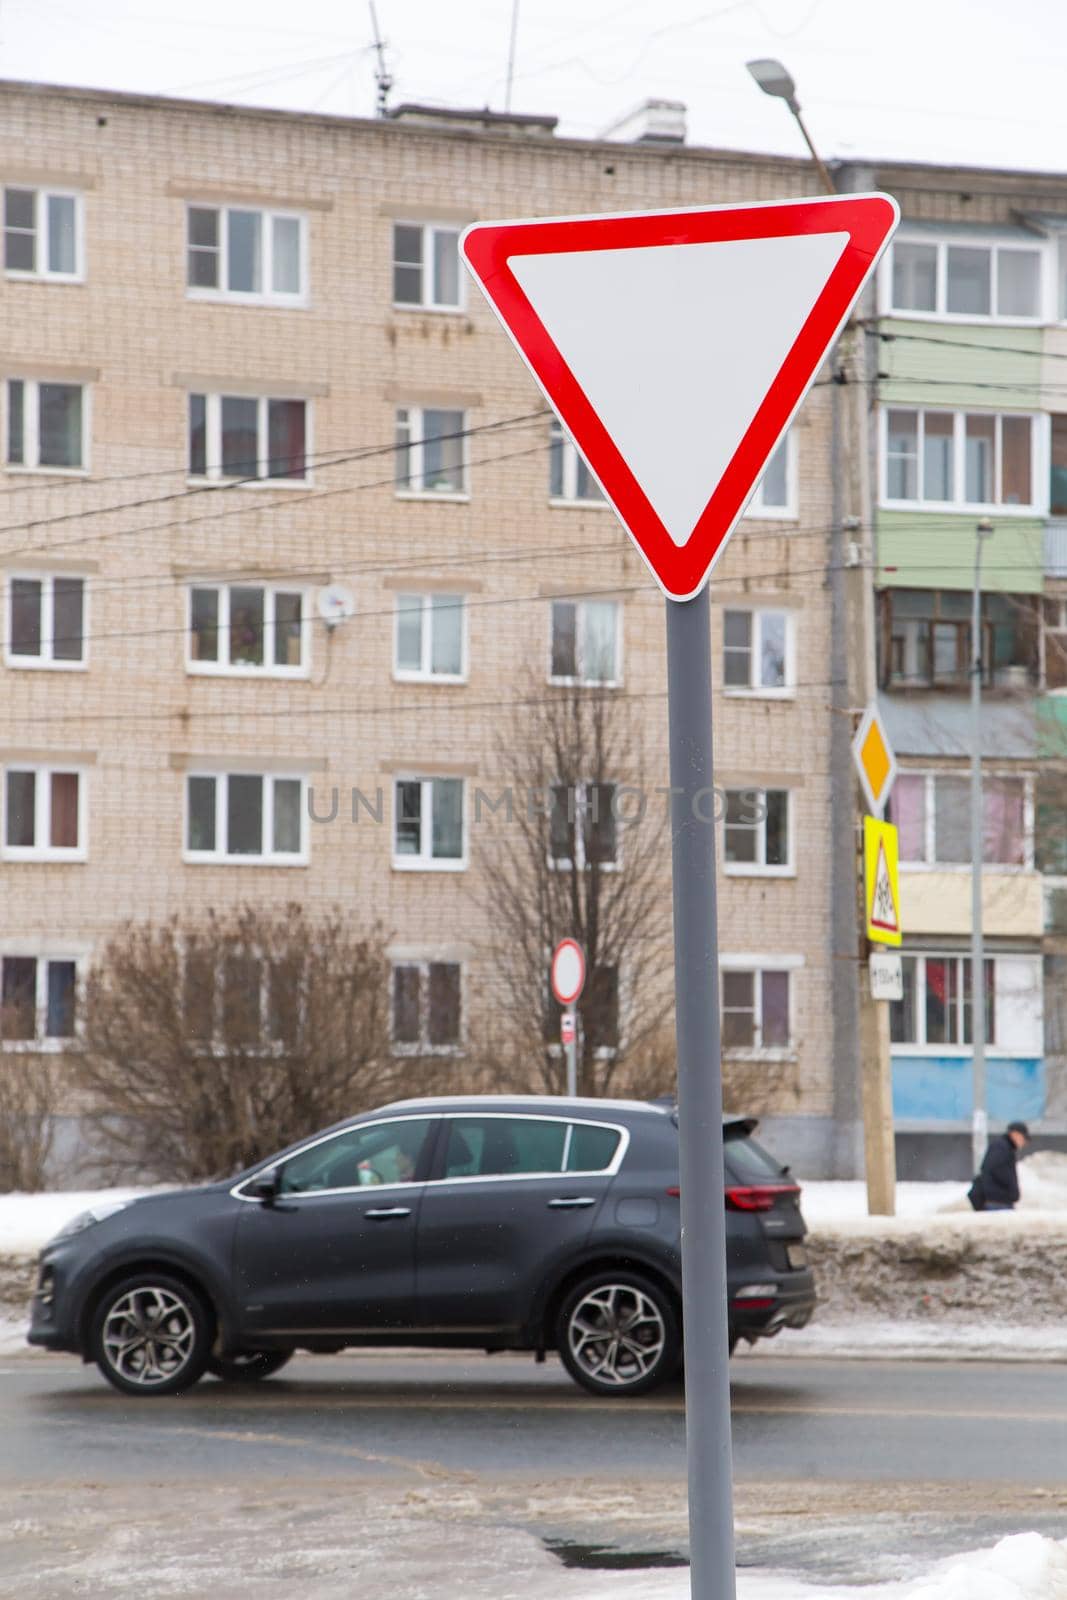 A white triangle sign with a red outline means give way. by anarni33